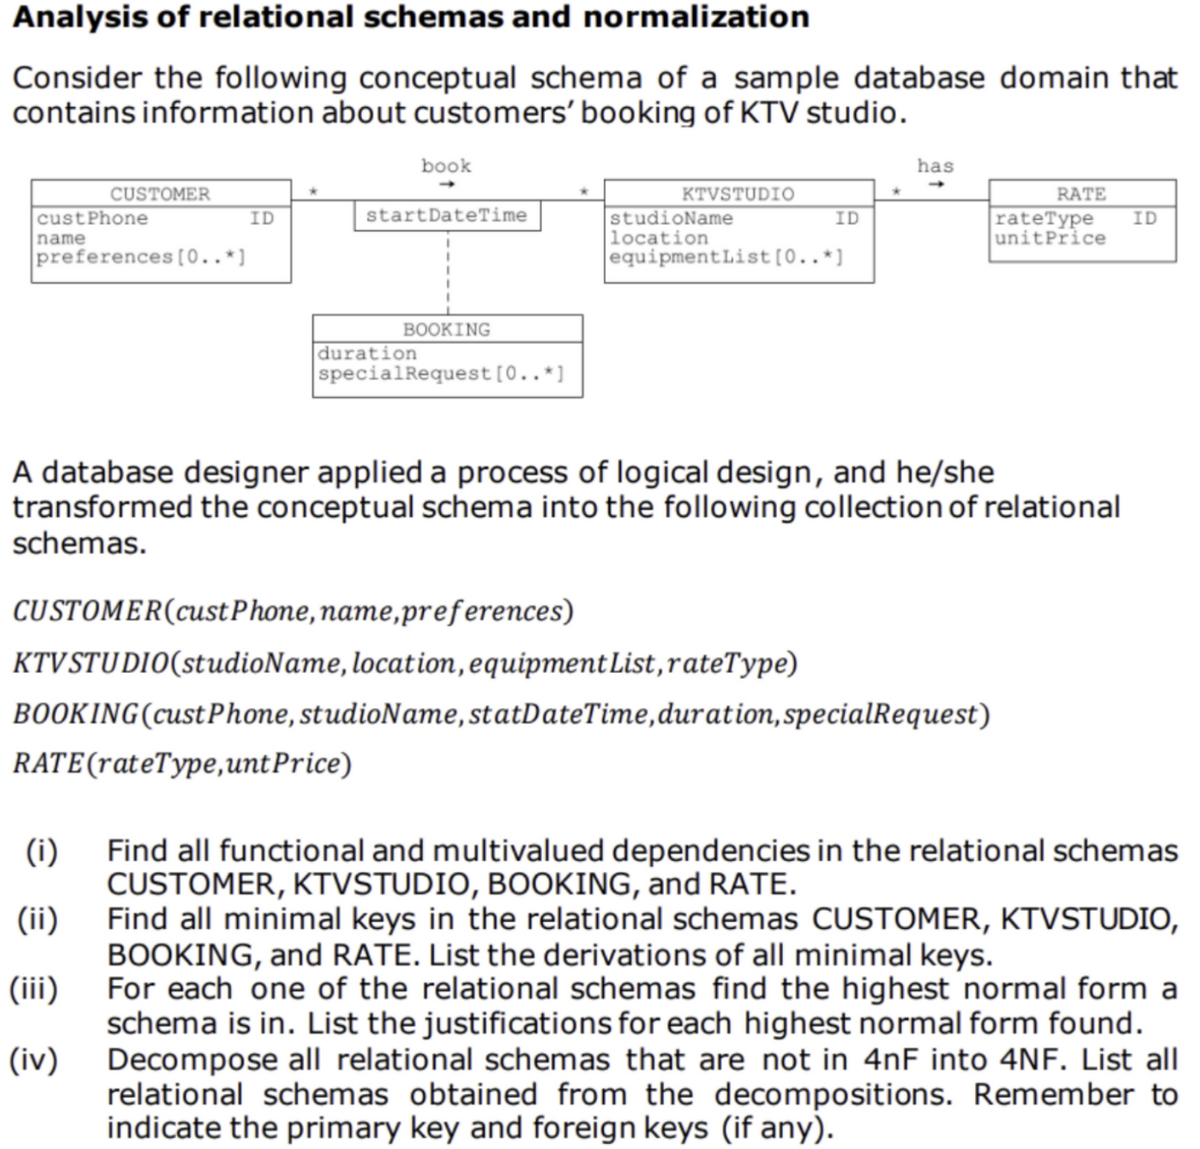 Analysis of relational schemas and normalization
Consider the following conceptual schema of a sample database domain that
contains information about customers' booking of KTV studio.
book
has
CUSTOMER
custPhone
name
preferences [0..*]
KTVSTUDIO
studioName
location
equipmentList[0..*]
RATE
ID
startDateTime
rateType
unitPrice
ID
ID
BOOKING
duration
specialRequest[0..*]
A database designer applied a process of logical design, and he/she
transformed the conceptual schema into the following collection of relational
schemas.
CUSTOMER(custPhone,name,preferences)
KTVSTUDIO(studioName, location, equipment List,rateType)
BOOKING(custPhone, studioName, statDateTime,duration,specialRequest)
RATE(rateType,untPrice)
(i)
Find all functional and multivalued dependencies in the relational schemas
CUSTOMER, KTVSTUDIO, BOOKING, and RATE.
Find all minimal keys in the relational schemas CUSTOMER, KTVSTUDIO,
BOOKING, and RATE. List the derivations of all minimal keys.
For each one of the relational schemas find the highest normal form a
schema is in. List the justifications for each highest normal form found.
Decompose all relational schemas that are not in 4nF into 4NF. List all
relational schemas obtained from the decompositions. Remember to
indicate the primary key and foreign keys (if any).
(ii)
(iii)
(iv)
